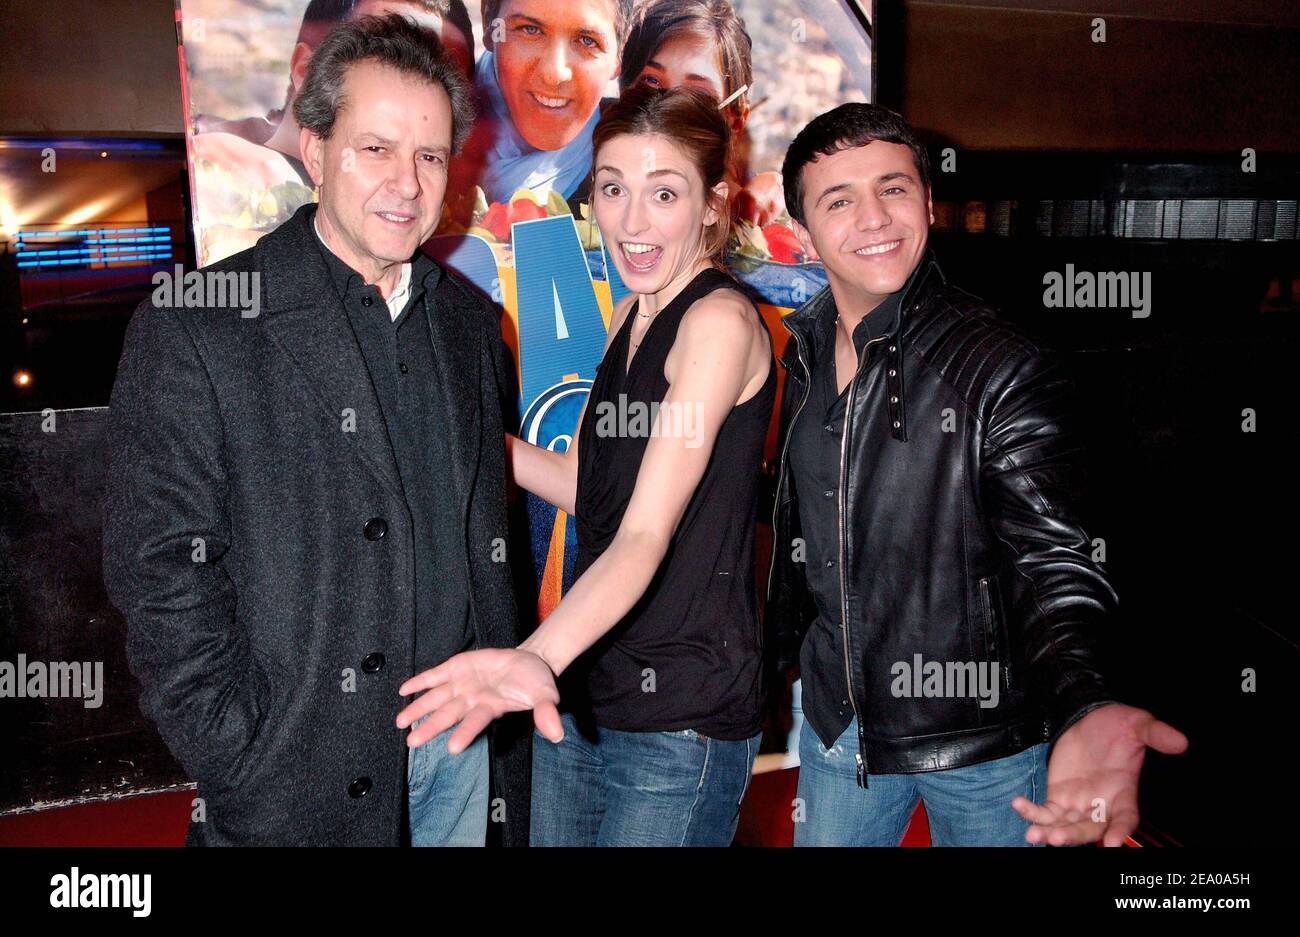 (L-R) French movie director Merzak Allouache, French actress and cast member Julie Gayet, French singer and cast member Faudel attend the premiere of the movie 'Bab El Web' in Paris on March 14, 2005. Photo by Bruno Klein/ABACA. Stock Photo